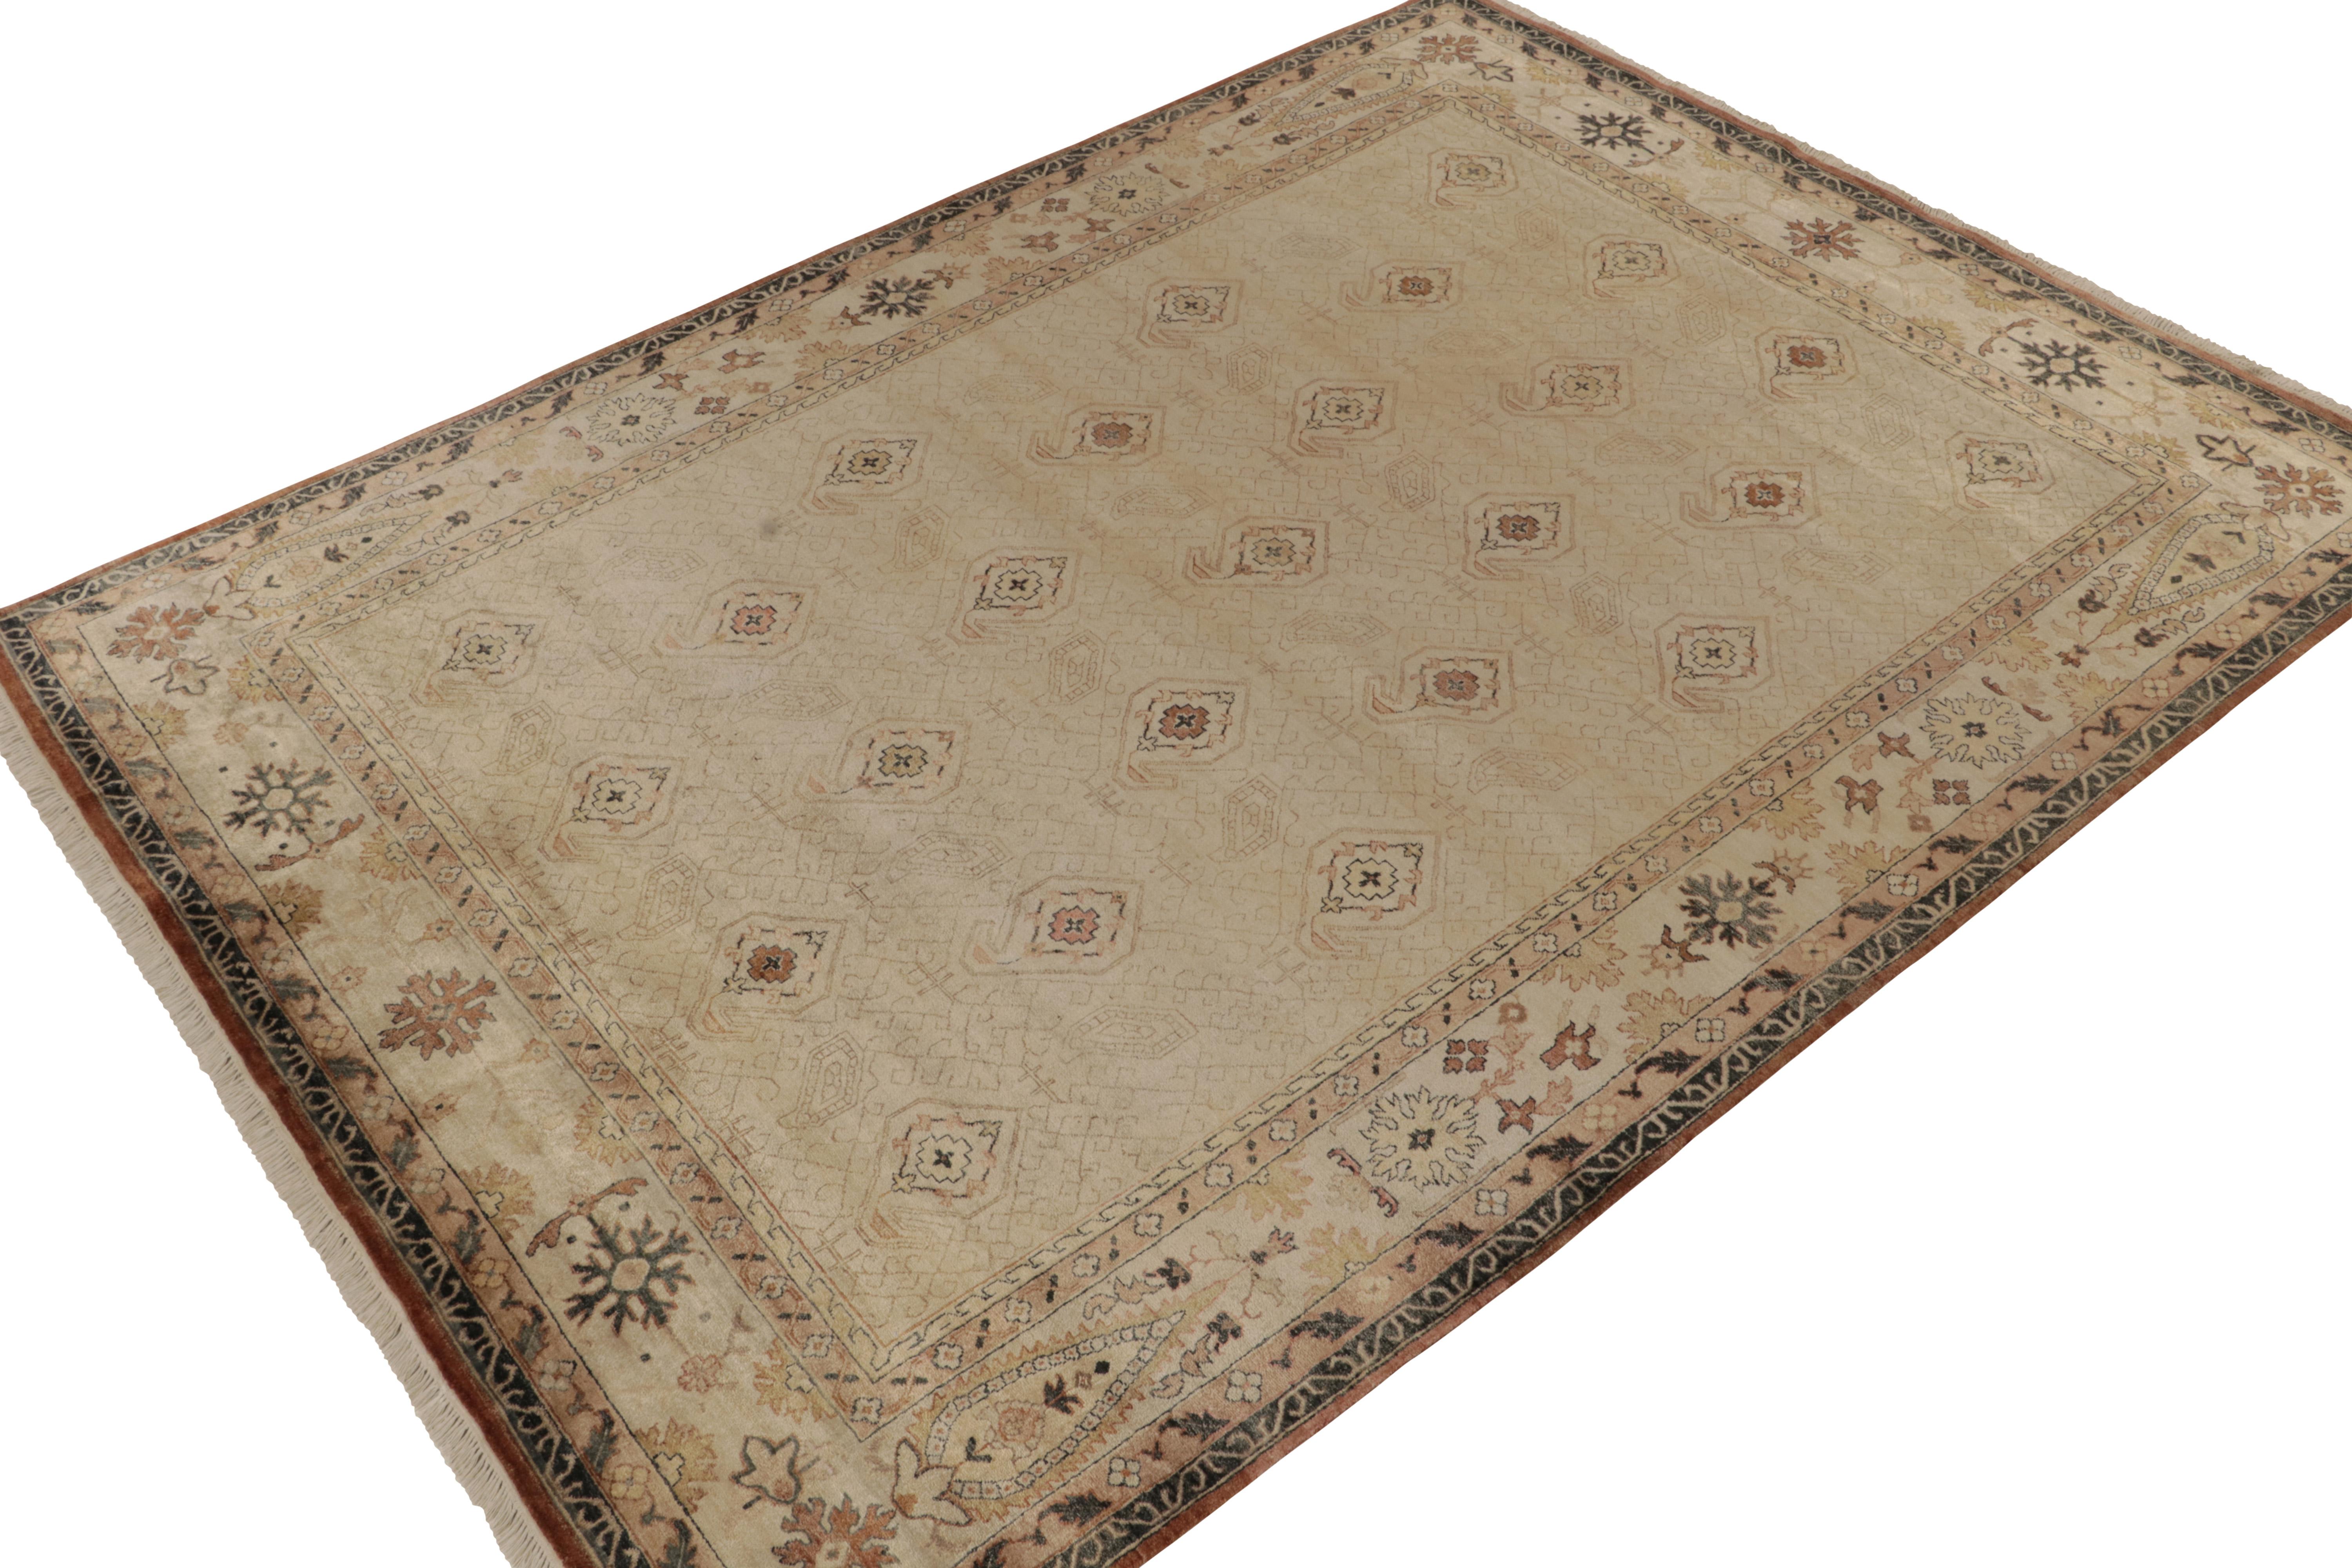 Rug & Kilim’s proudly presents its contemporary take on classics with this gorgeous 9x12 rug. 

The design recaptures antique Persian tribal rugs in a more gracious scale, with paisley patterns in beige-brown. Keen eyes will admire a black border,